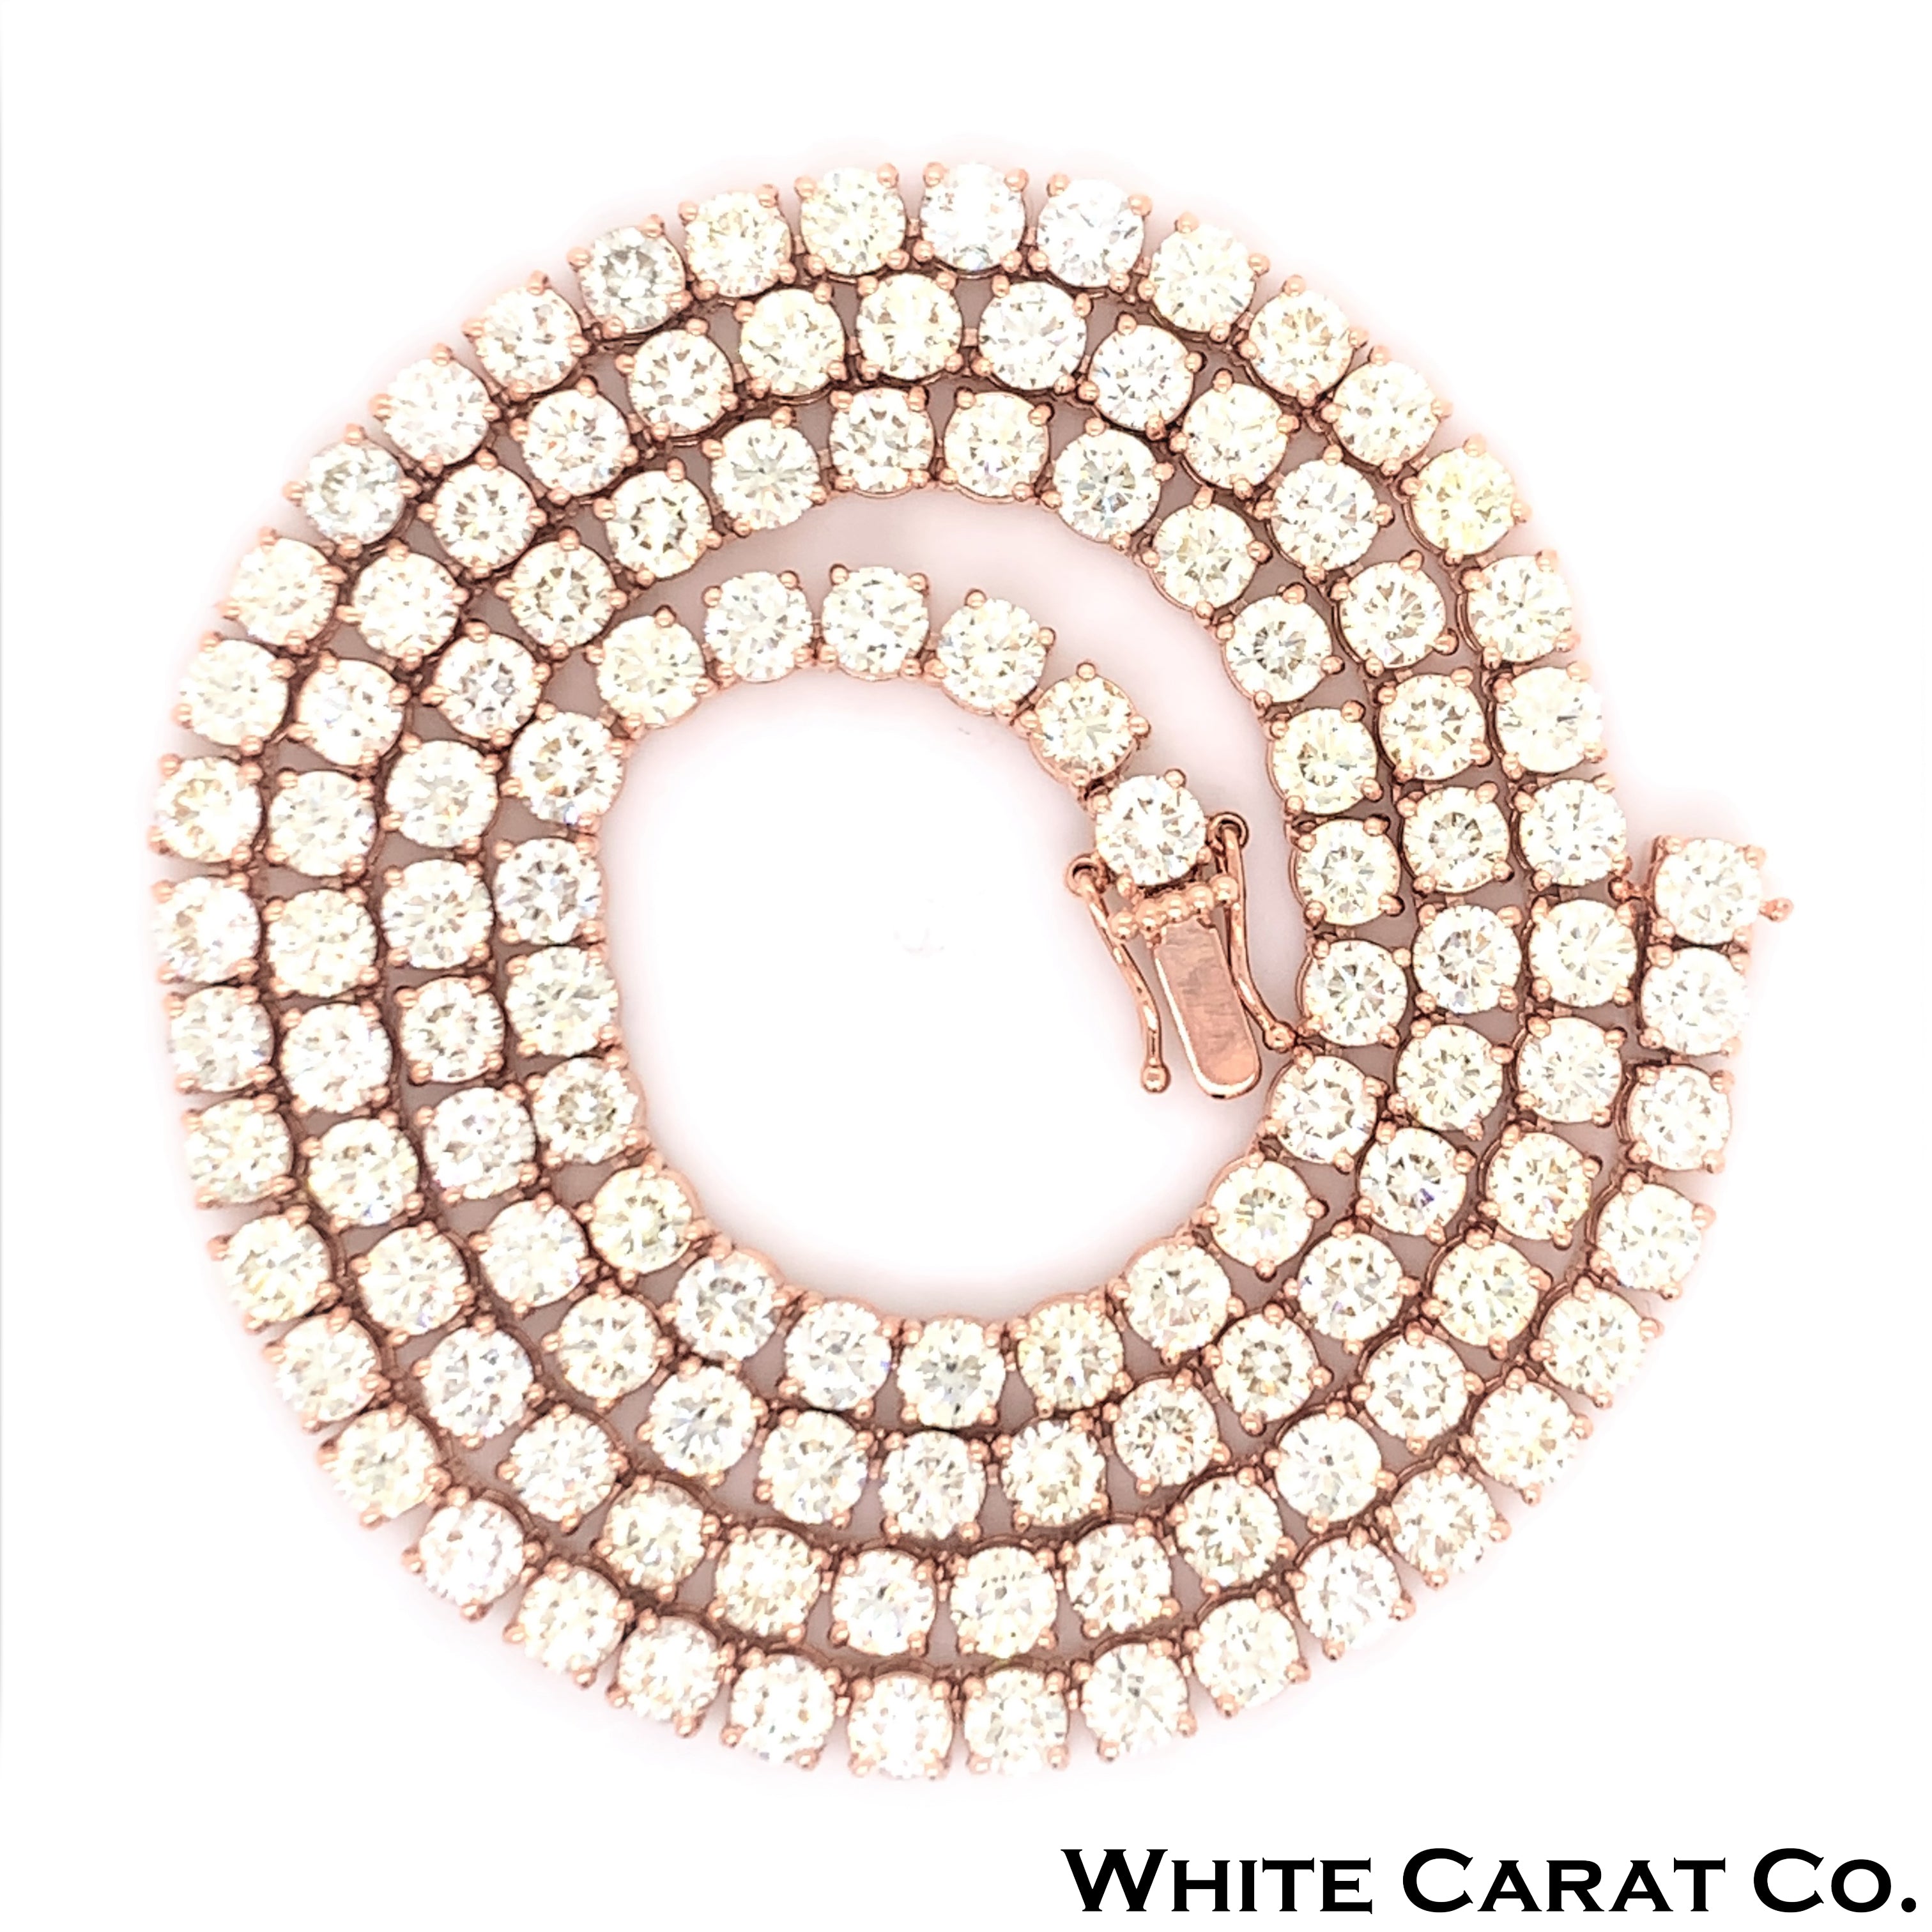 17PT- 19.00 CT. Tennis Necklace in 14K Rose Gold (4 Prong) - White Carat - USA & Canada